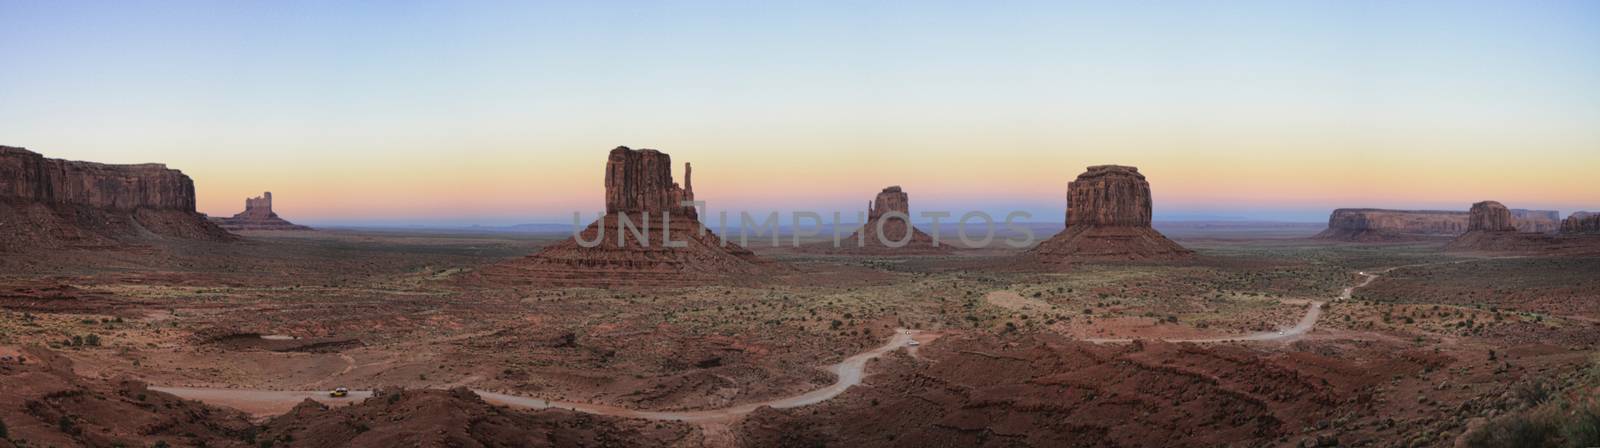 Monument Valley Panoramic view by vlad-m